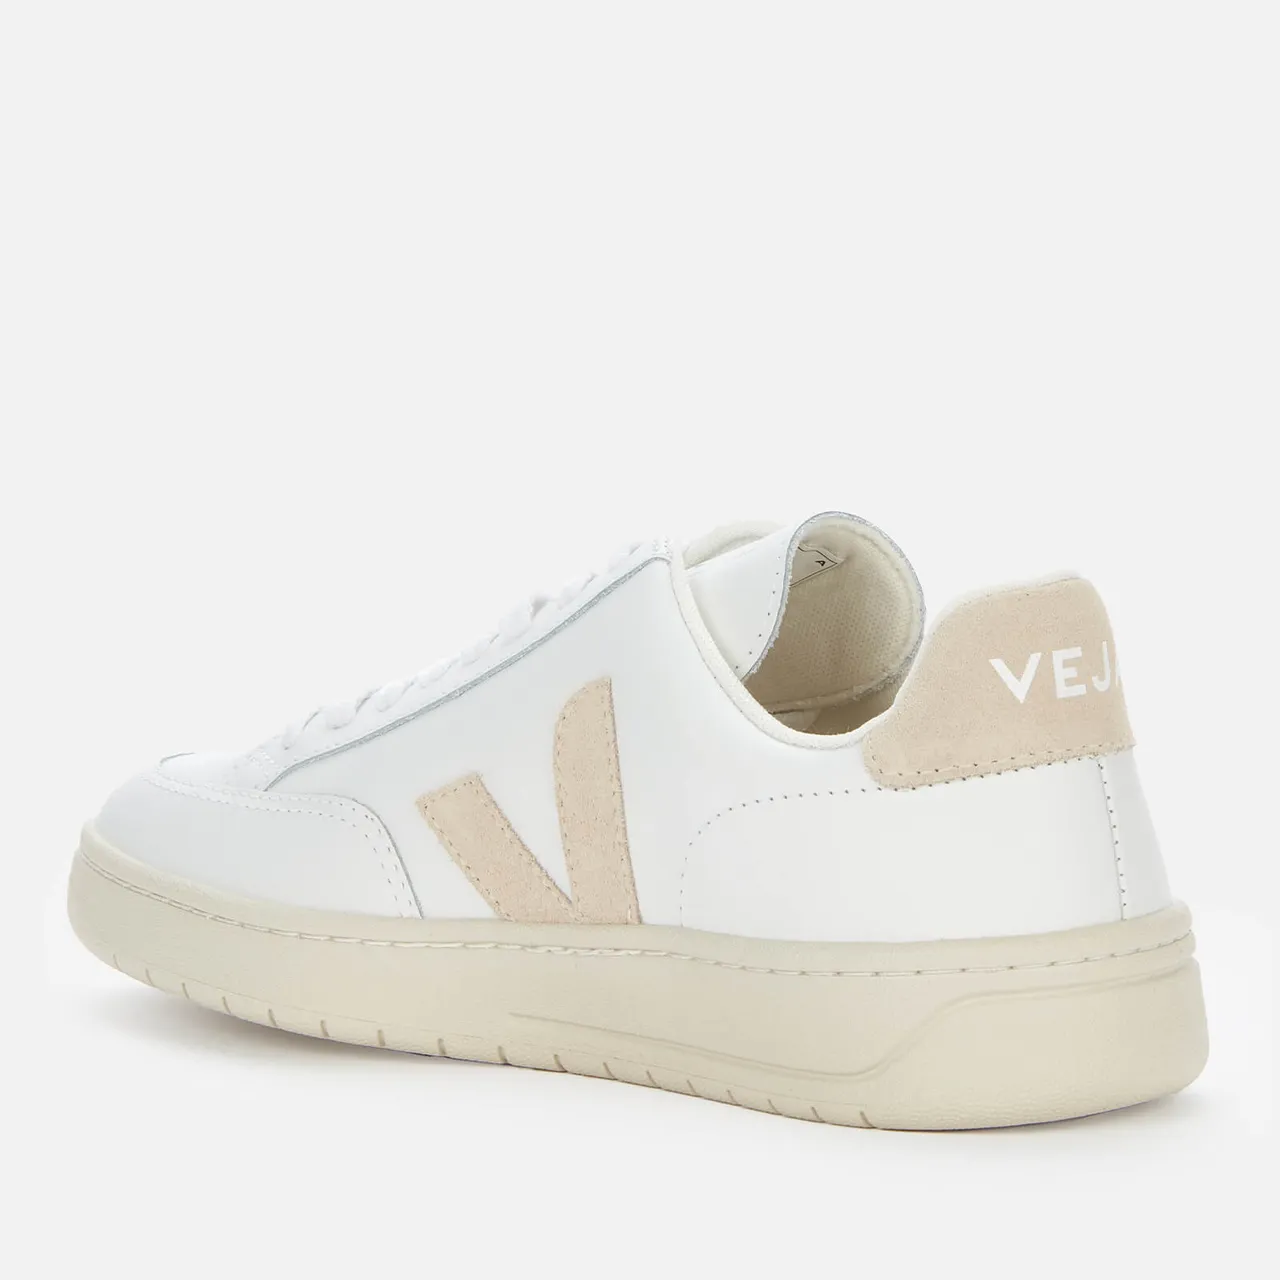 Veja Women's V-12 Leather Trainers - Extra White/Sable - UK